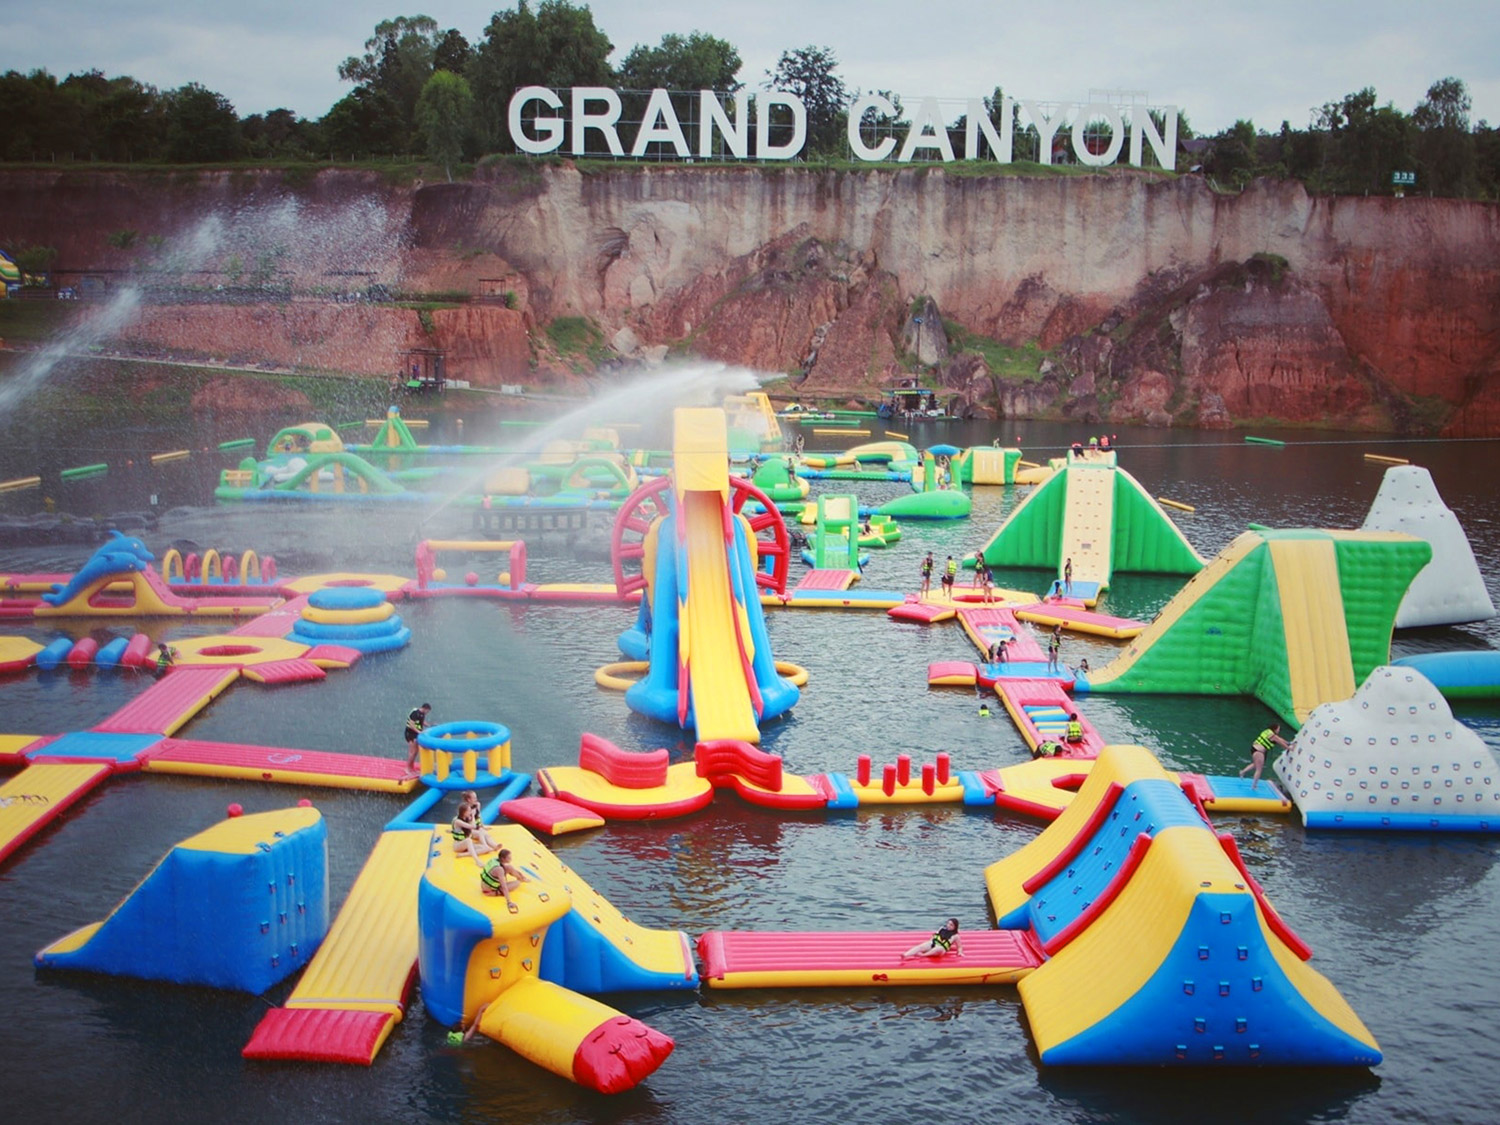 GRAND-CANYON-WATER-PARK-18